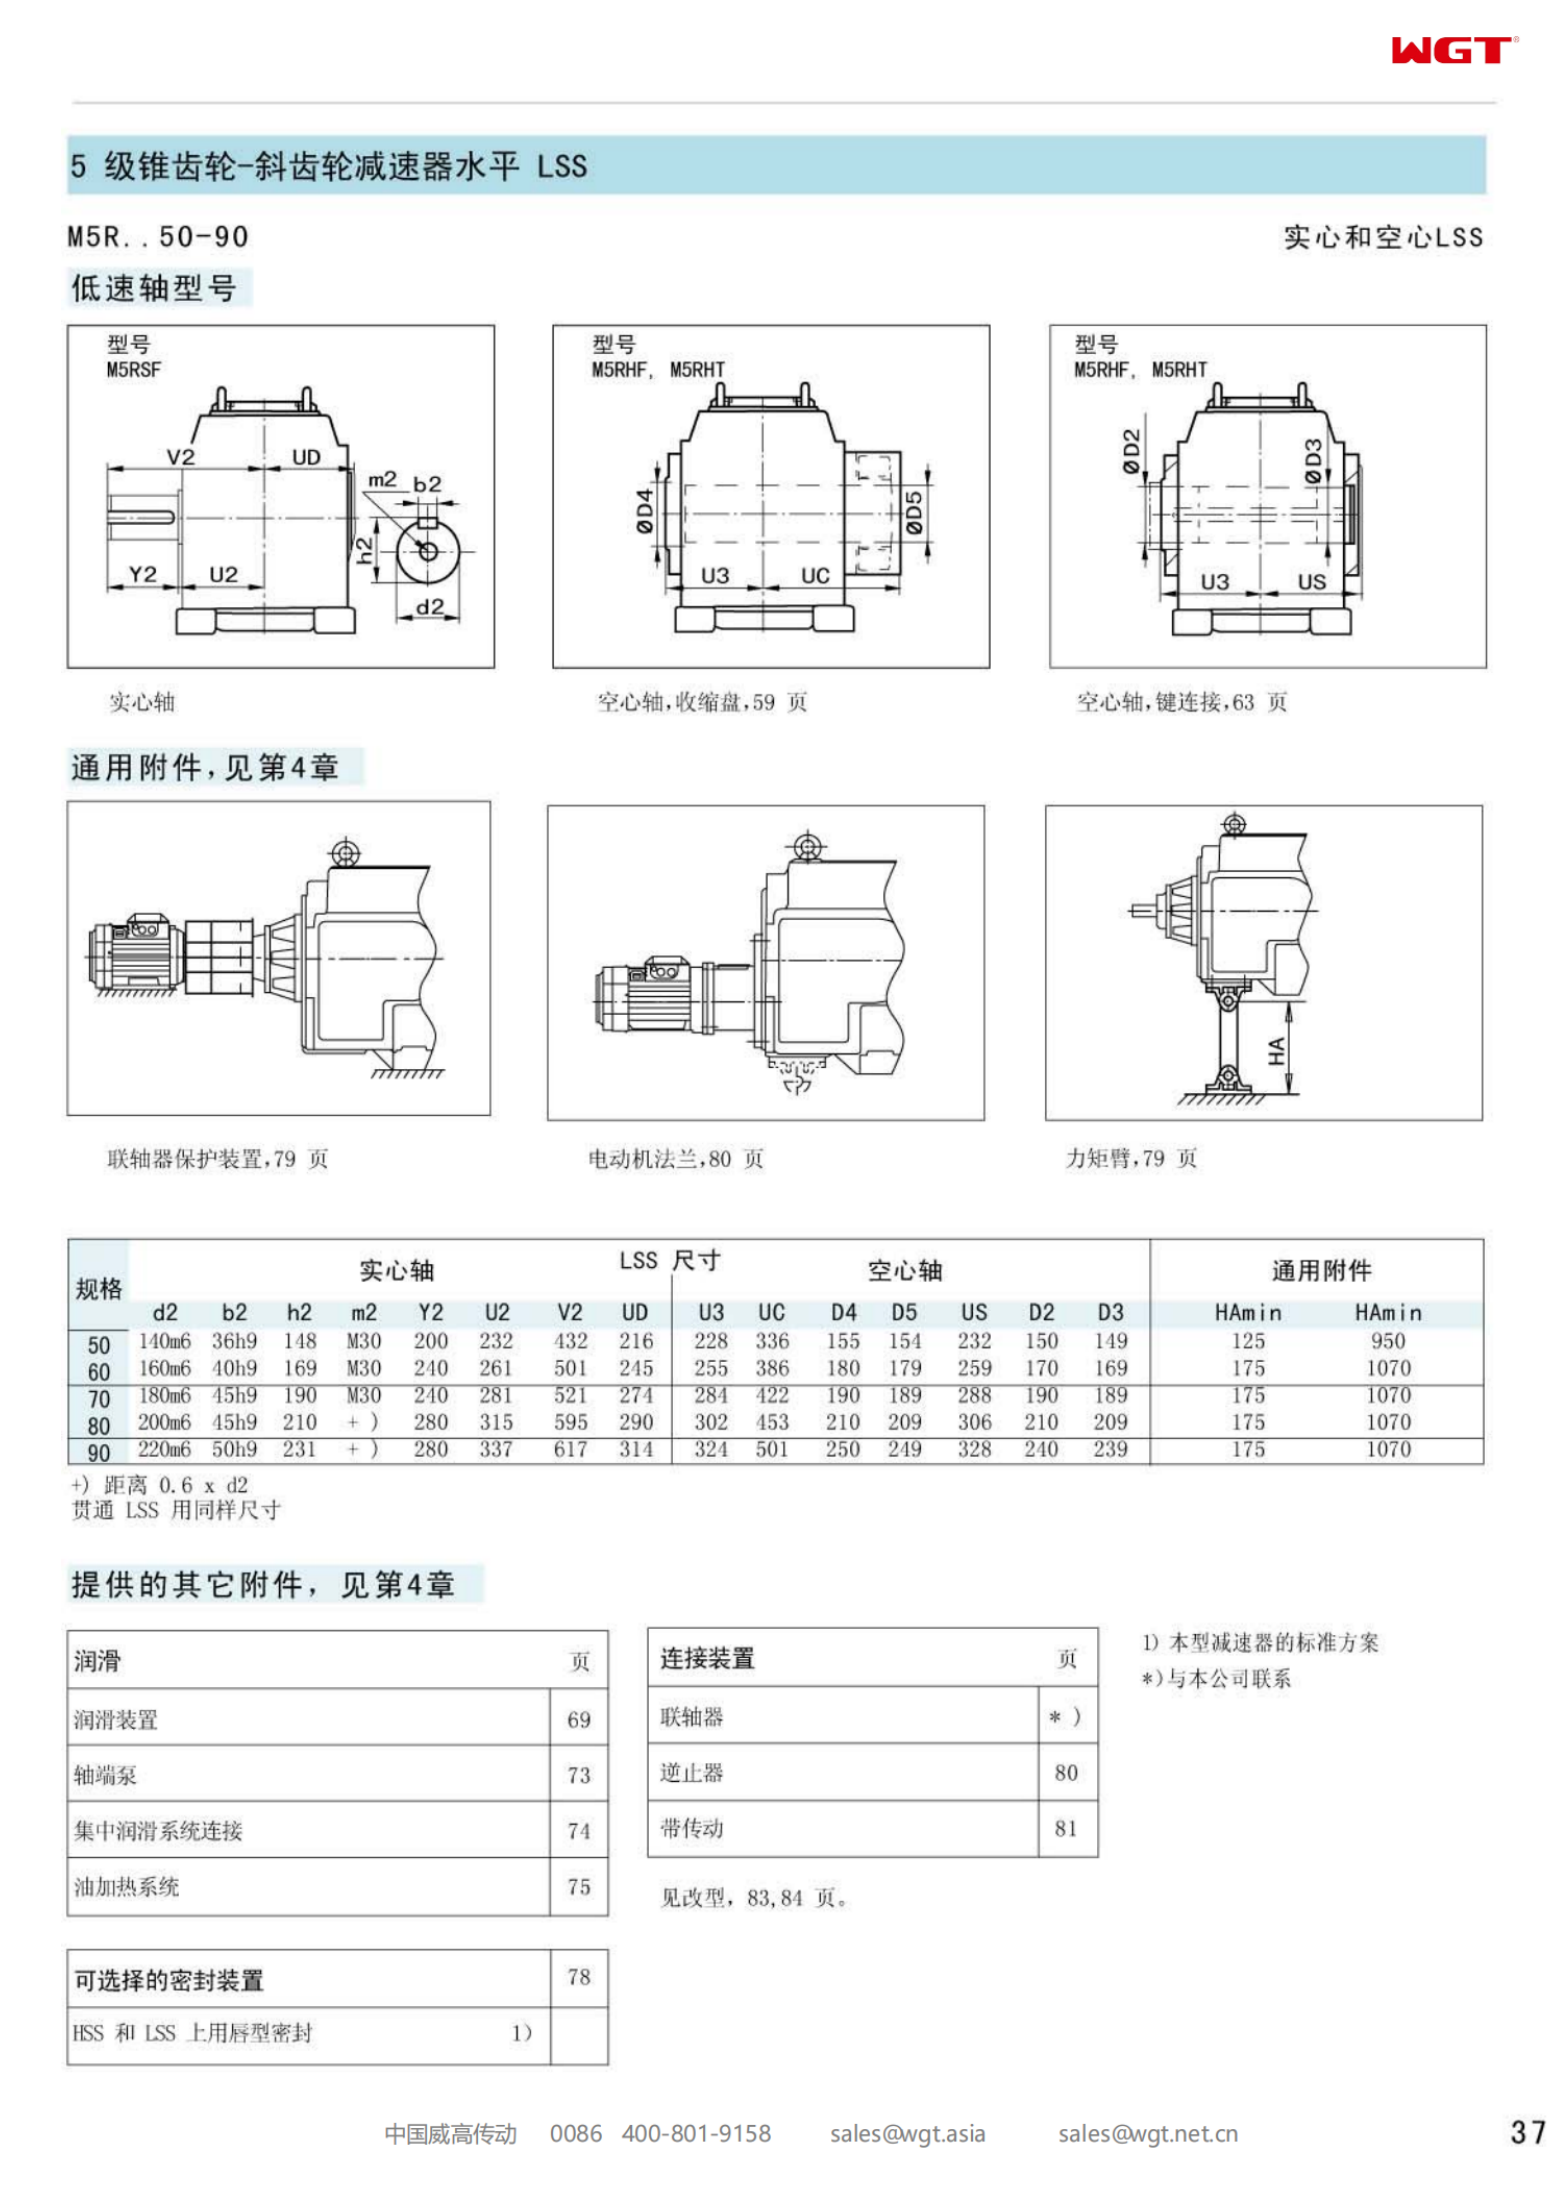 M5RSF60 Replace_SEW_M_Series Gearbox